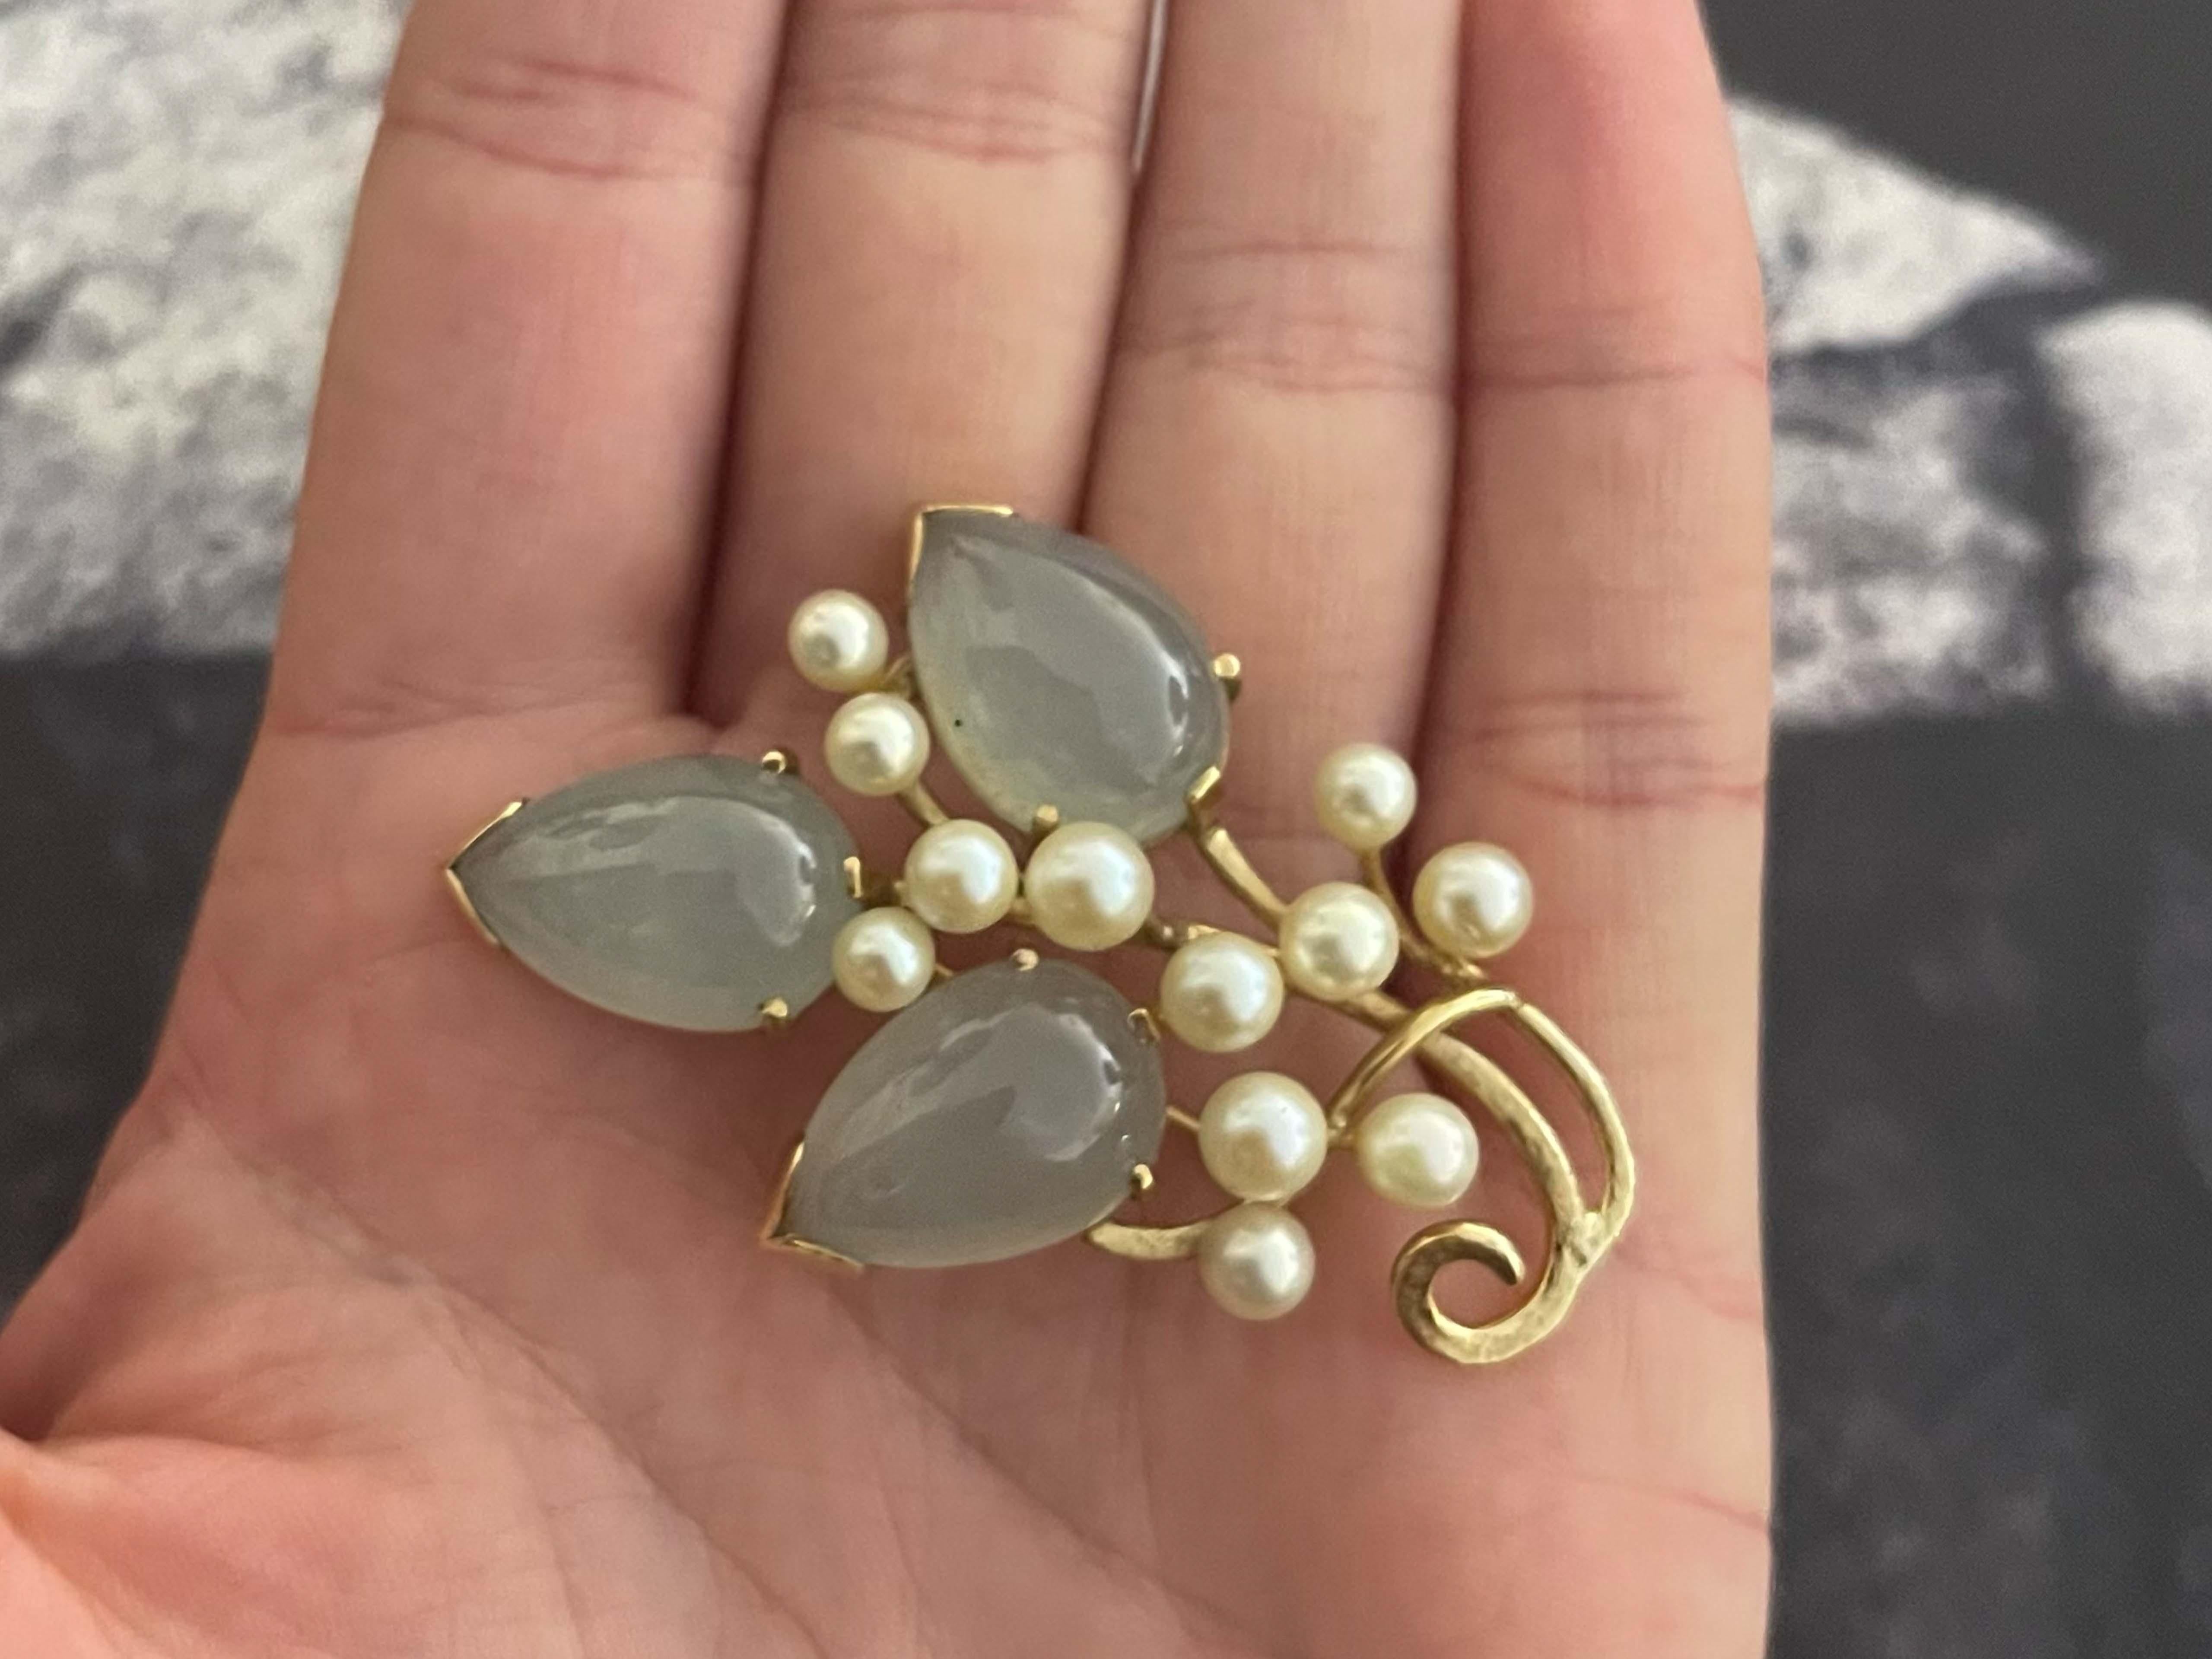 Brooch Specifications:

Designer: Ming's

Metal: 14k Yellow Gold

Total Weight: 16.3 Grams

Stones: Jade and akoya pearls

Brooch Measurements: 2